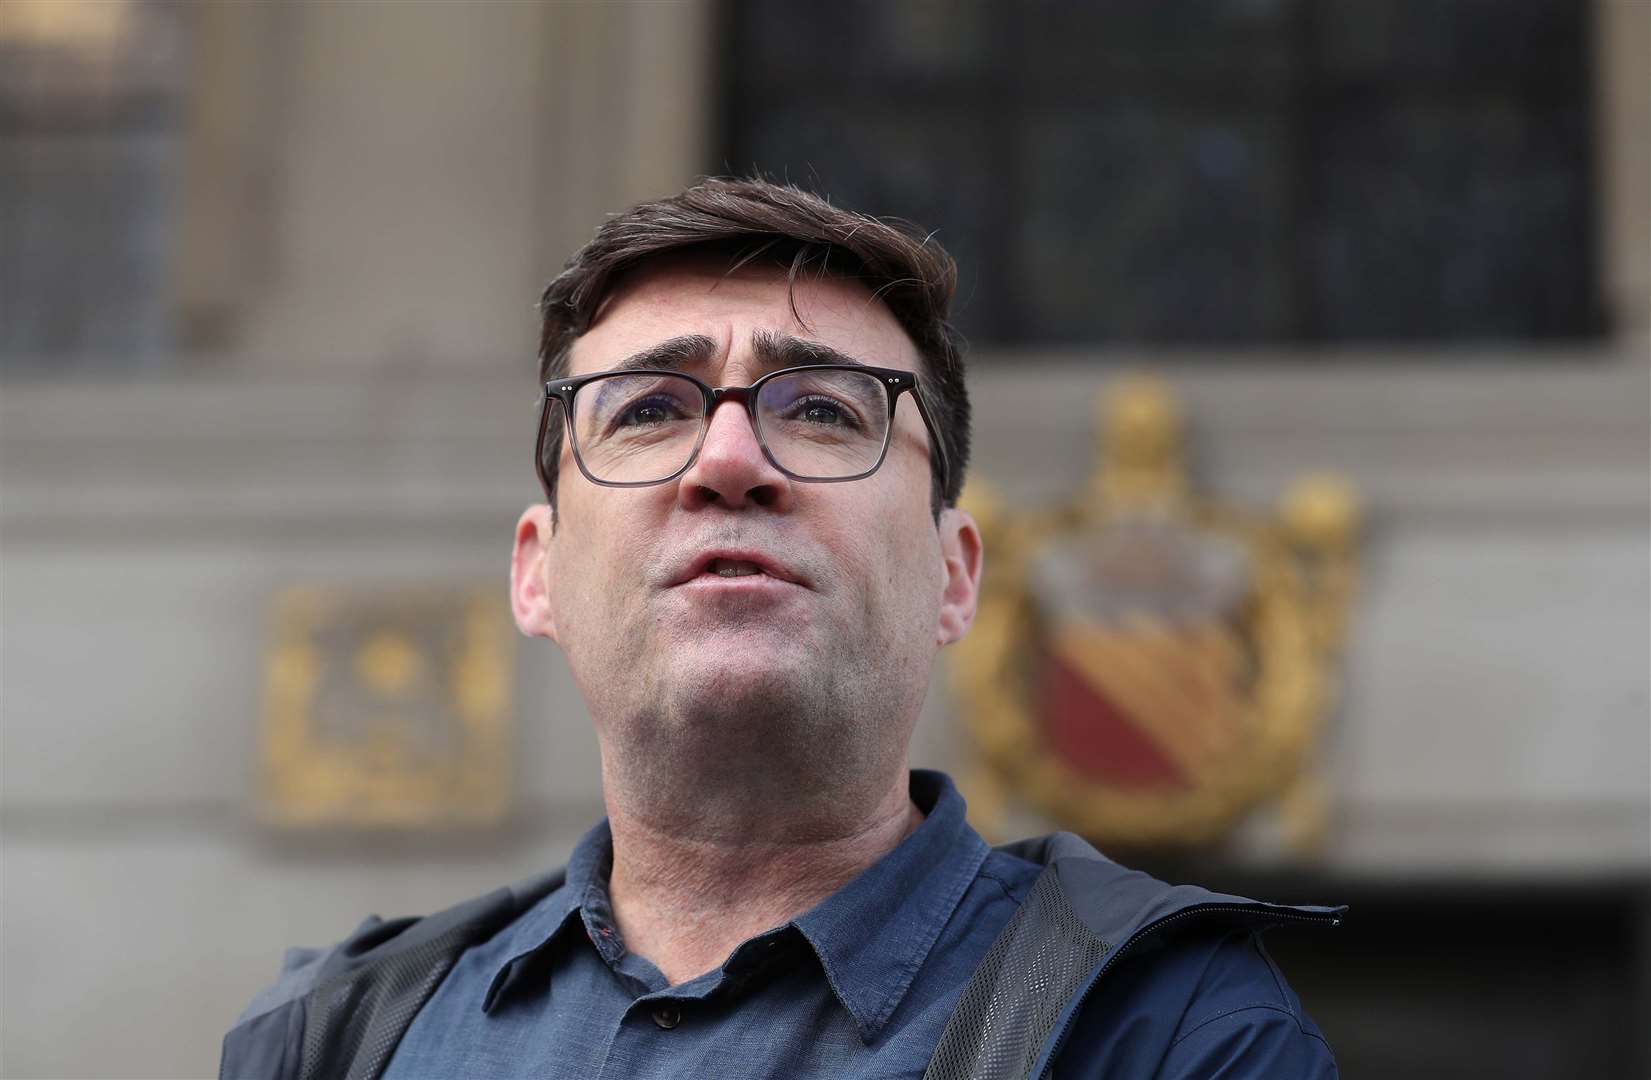 Greater Manchester mayor Andy Burnham accused the Government of treating the North with ‘contempt’ as the row erupted over the proposed restrictions (Martin Rickett/PA)